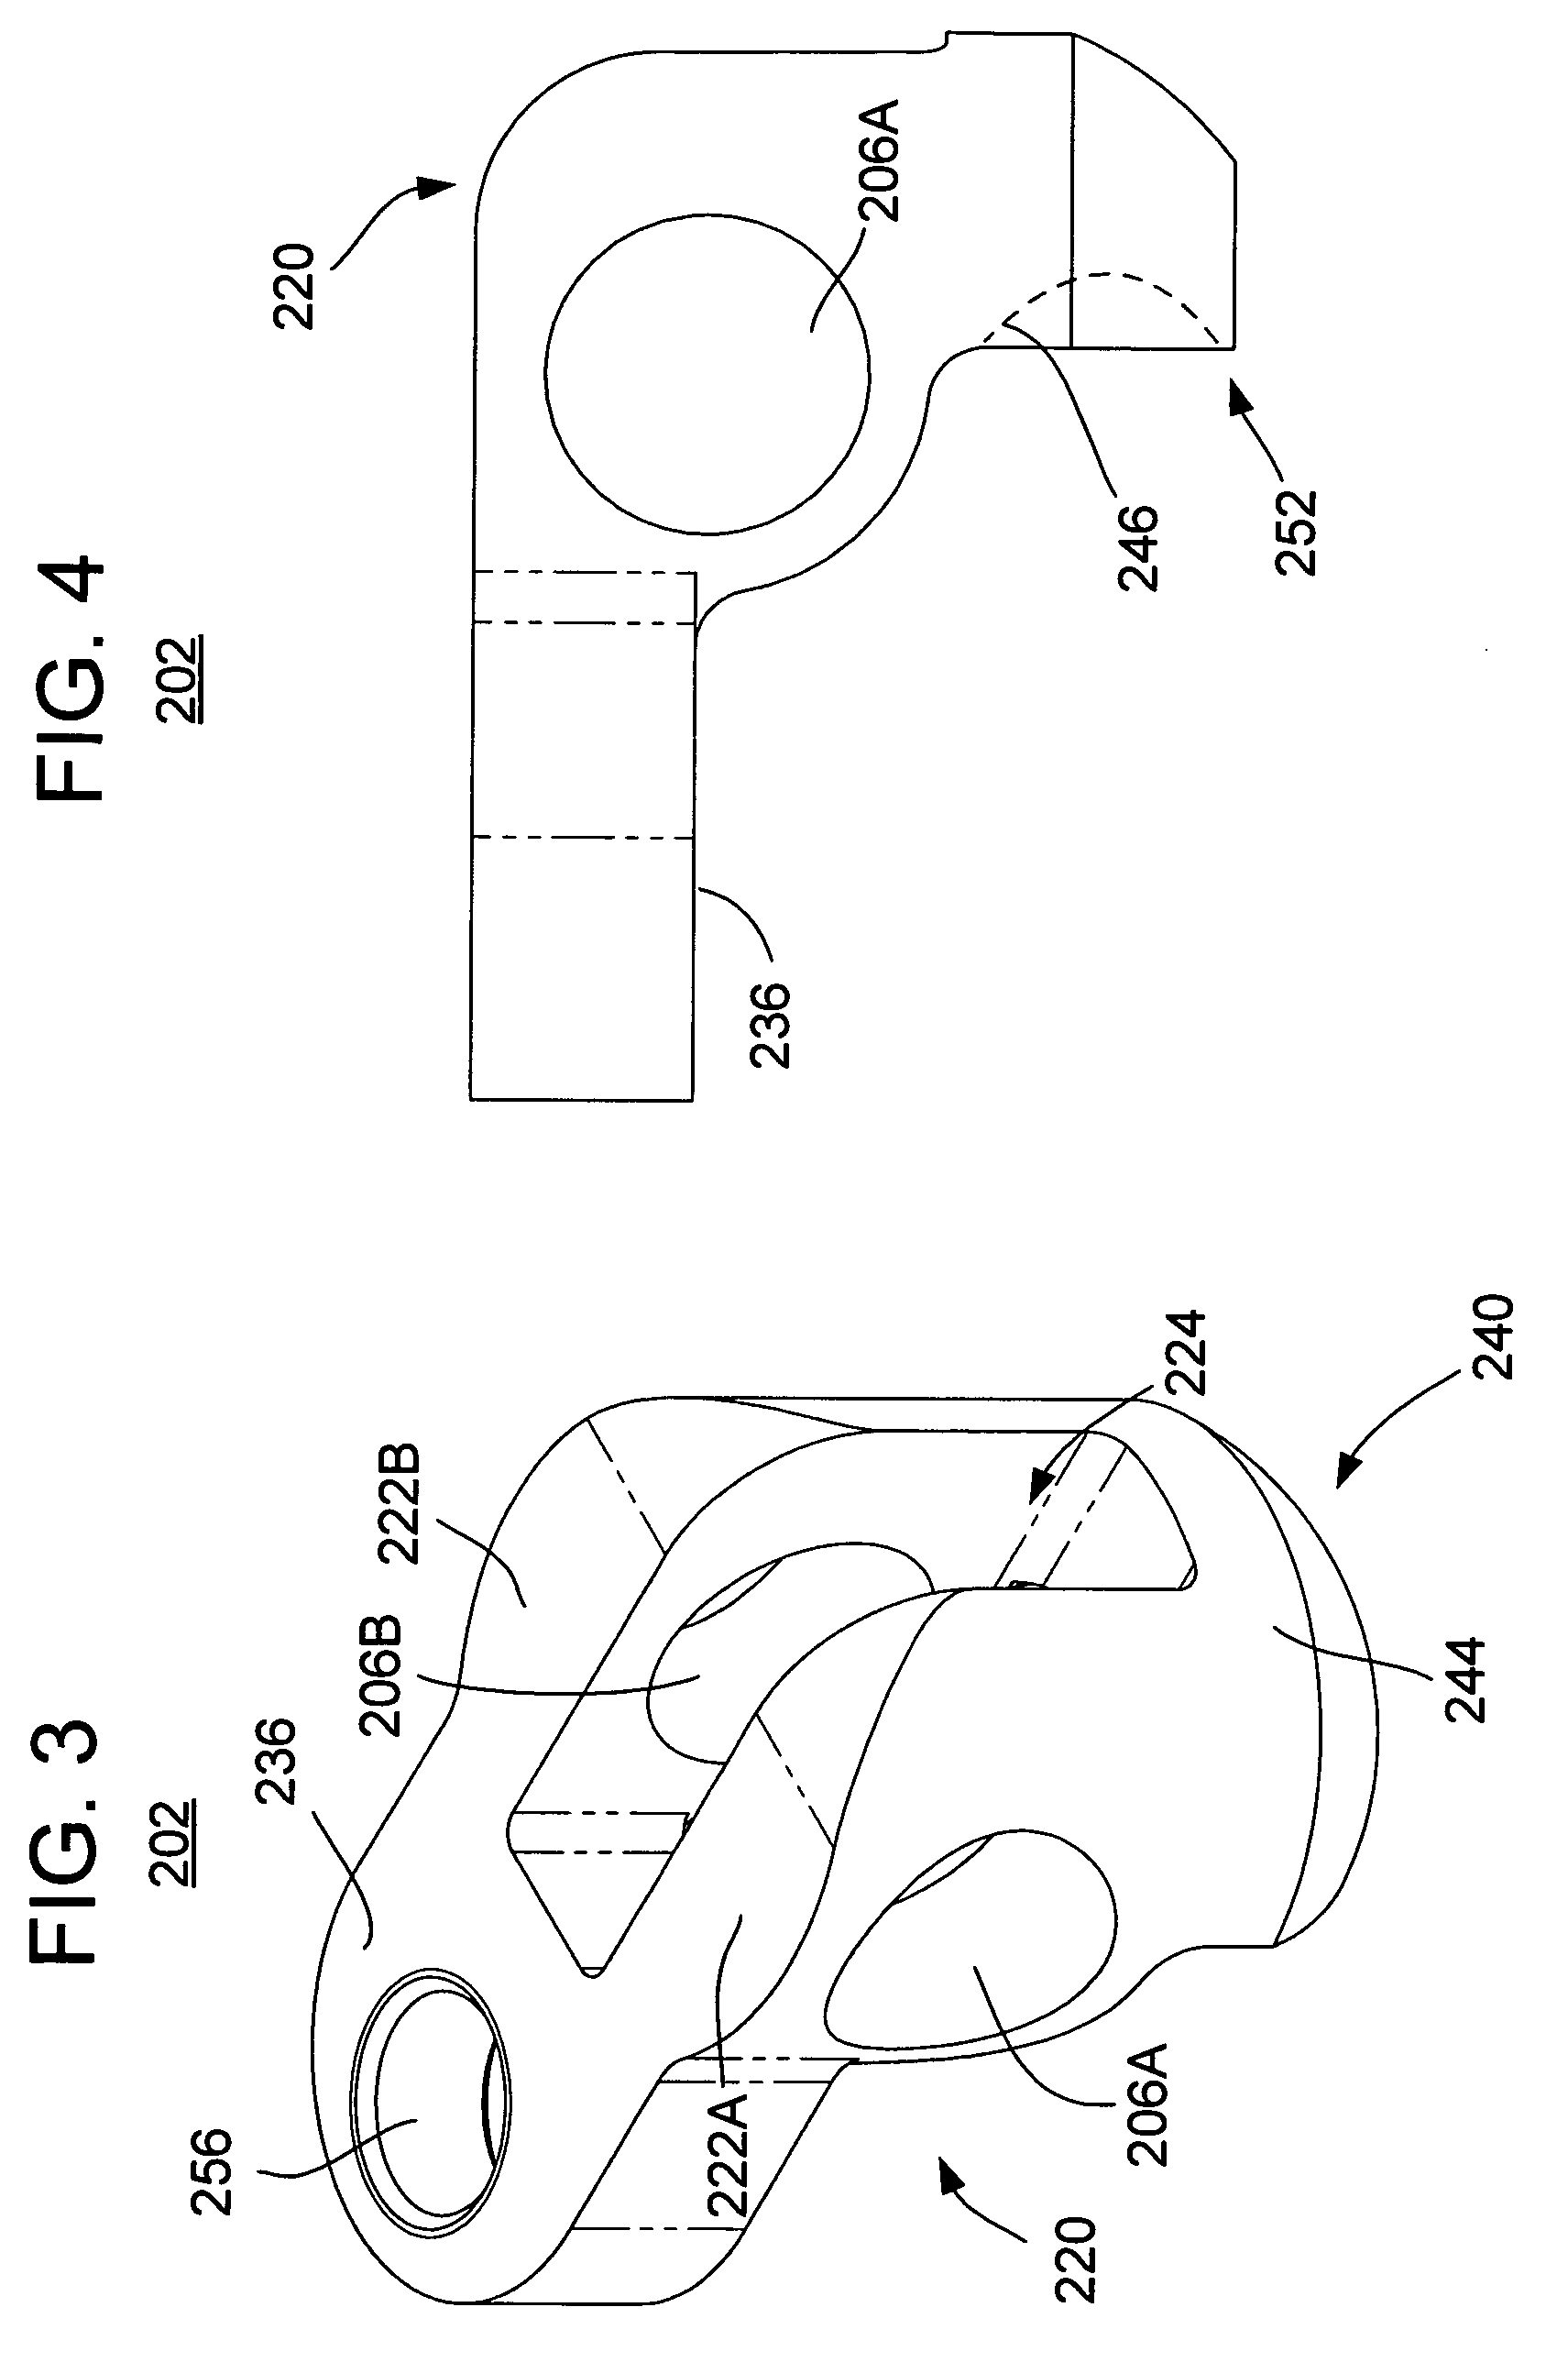 Spinal stabilization using bone anchor seat and cross coupling with improved locking feature